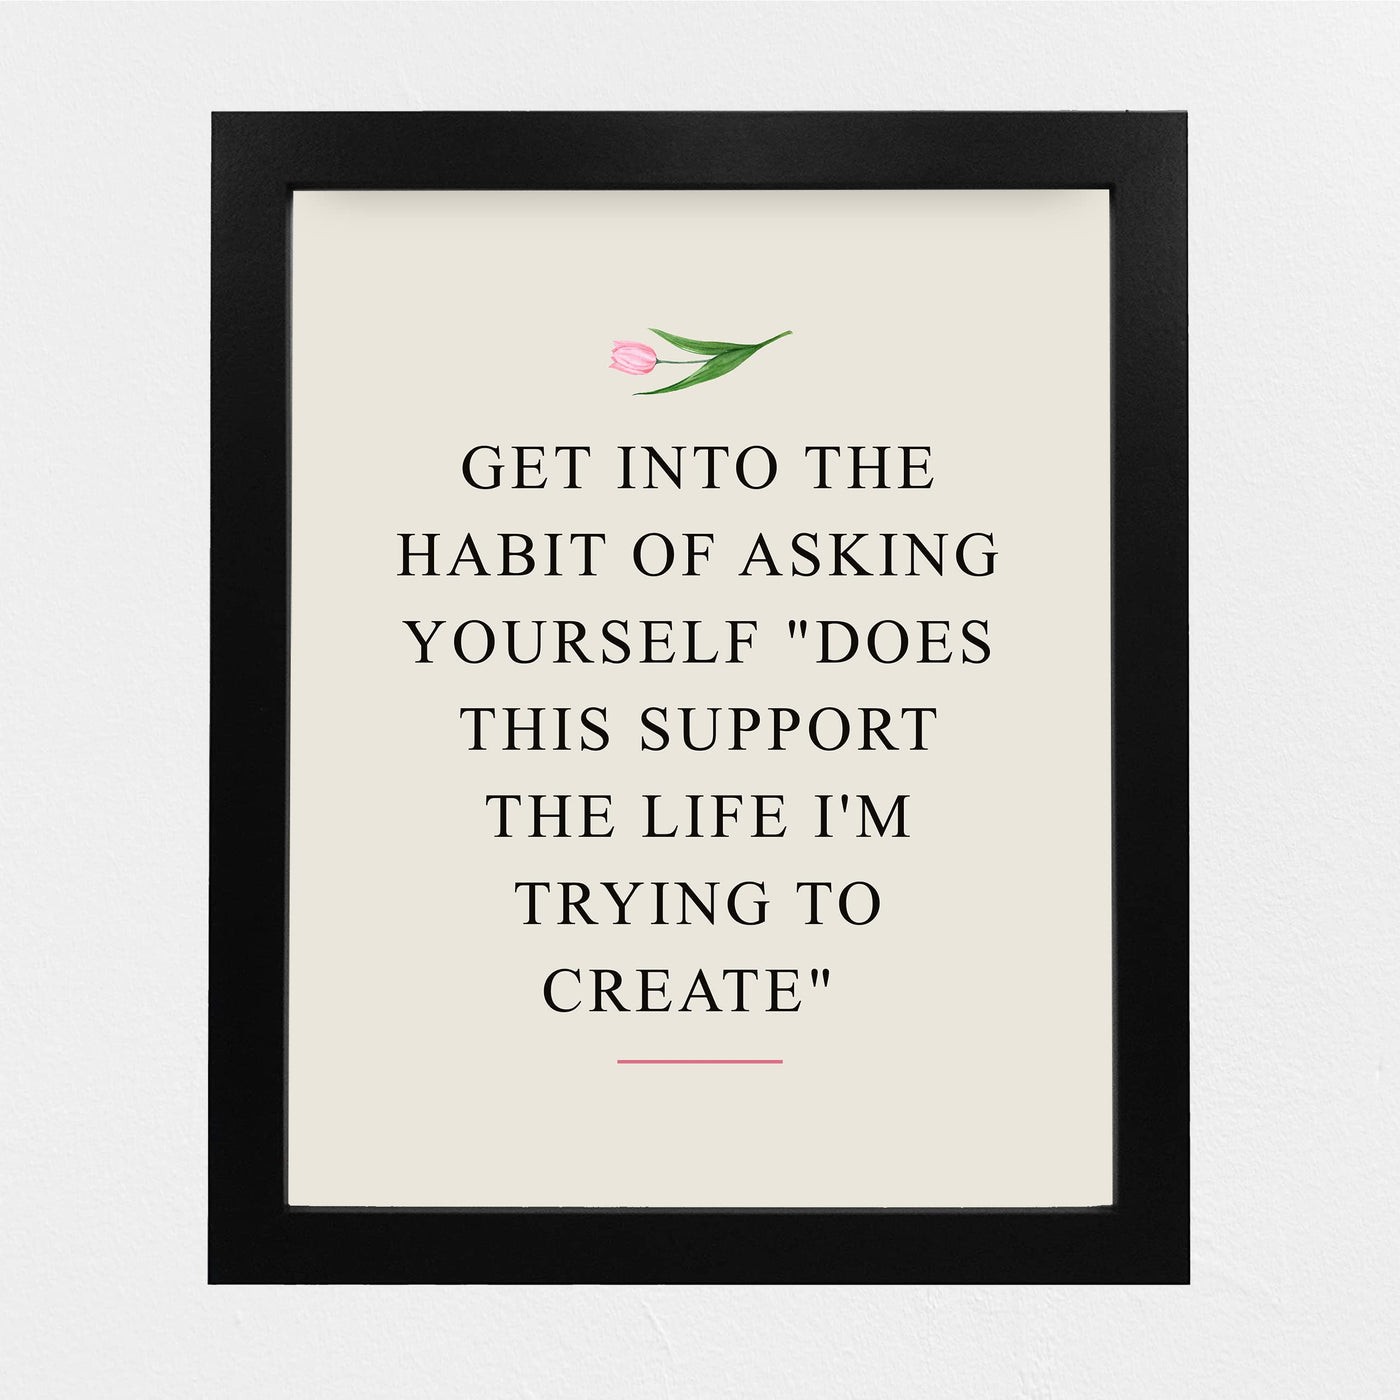 Ask Yourself-'Does This Support Life I'm Trying to Create?'-Inspirational Quotes Wall Art Sign-8 x 10" Modern Floral Art Print -Ready to Frame. Motivational Home-Office-Classroom Decor. Great Gift!